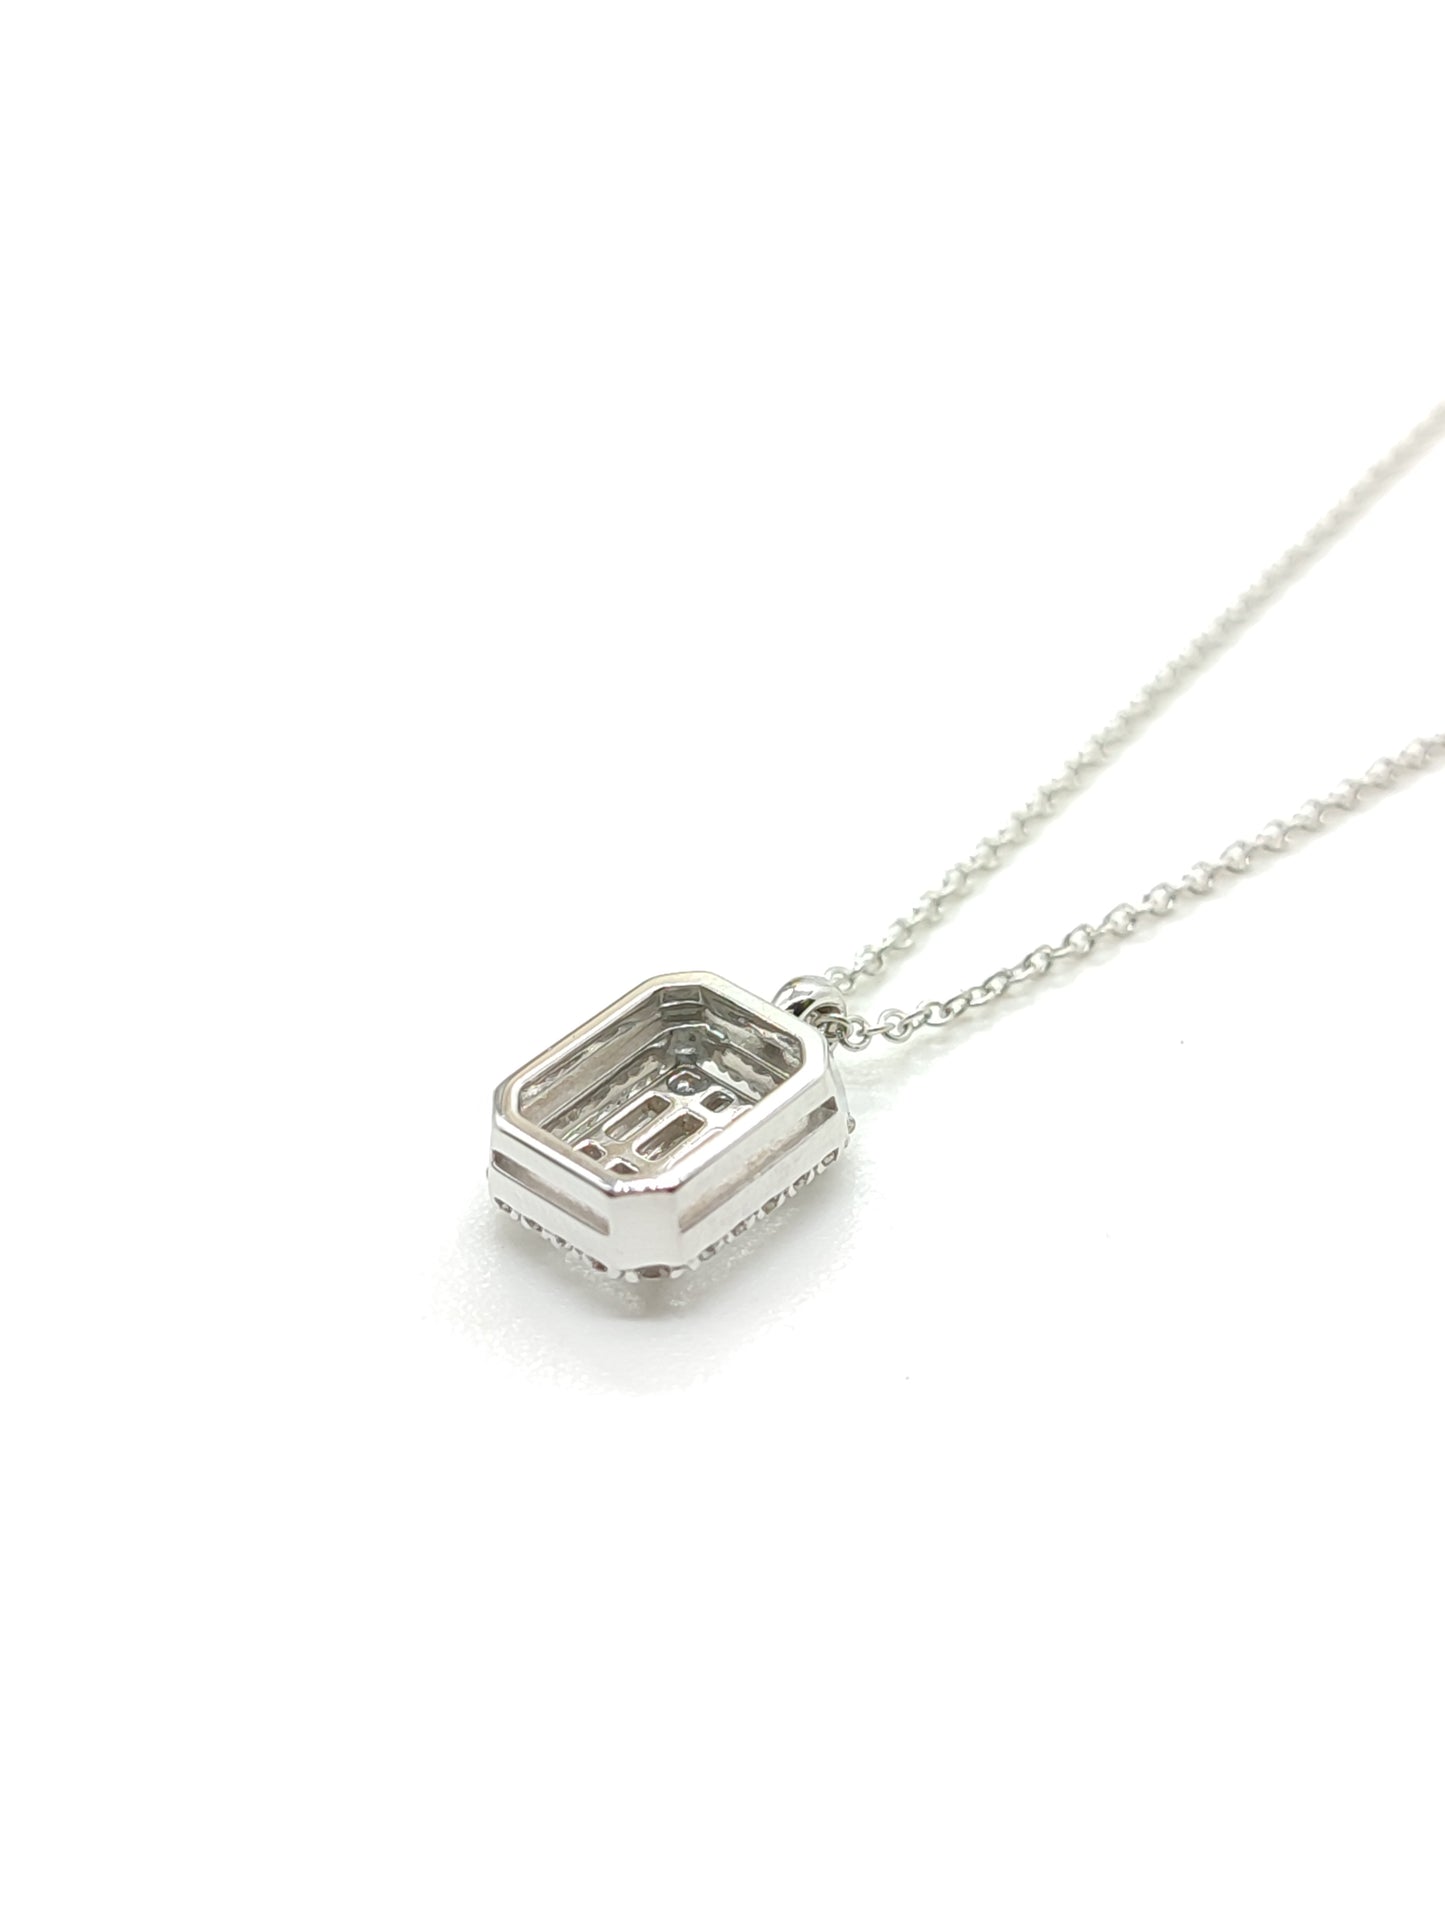 Gold necklace with rectangular pavé of 0.33ct diamonds